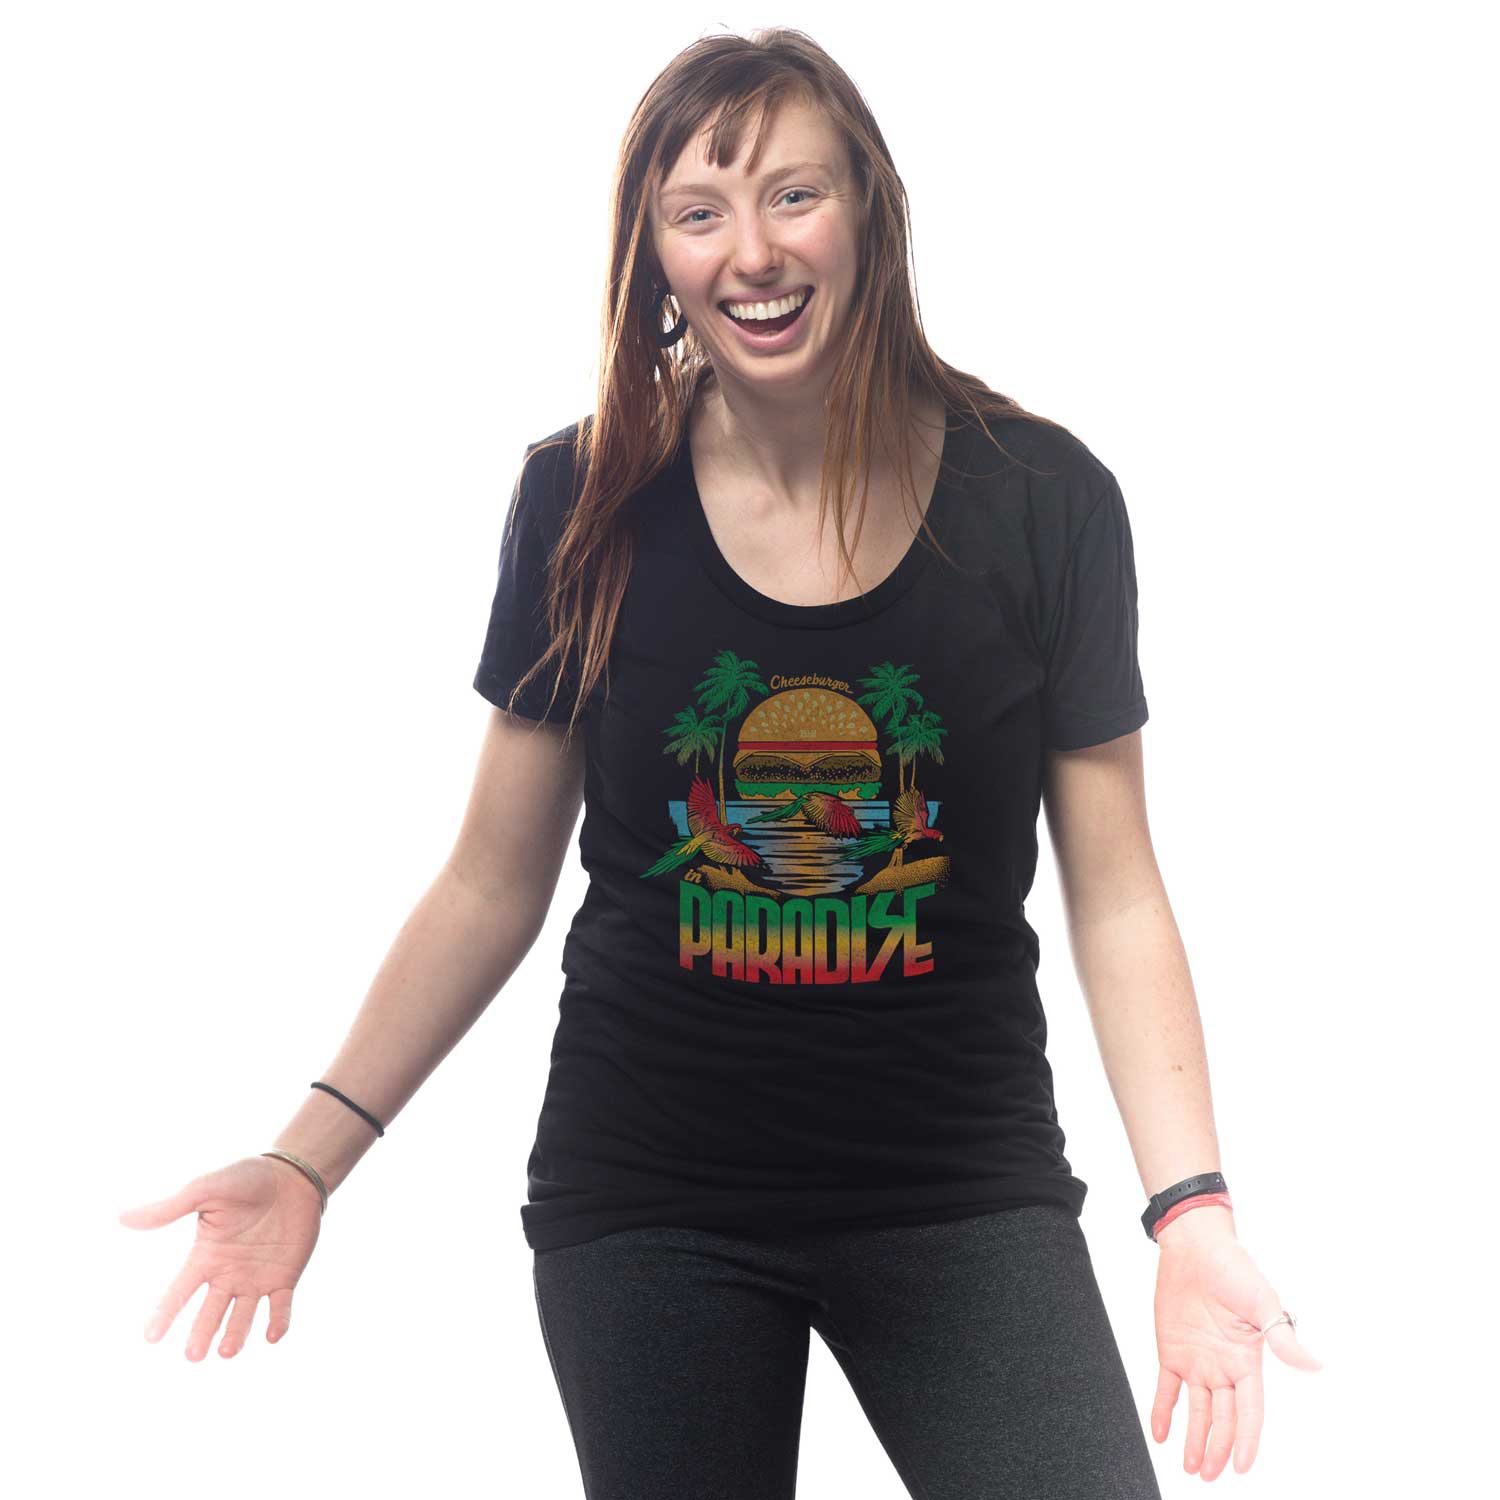 Women's Cheeseburger Paradise Graphic Tee | Cool Jimmy Buffet Black T-shirt on Model | Solid Threads